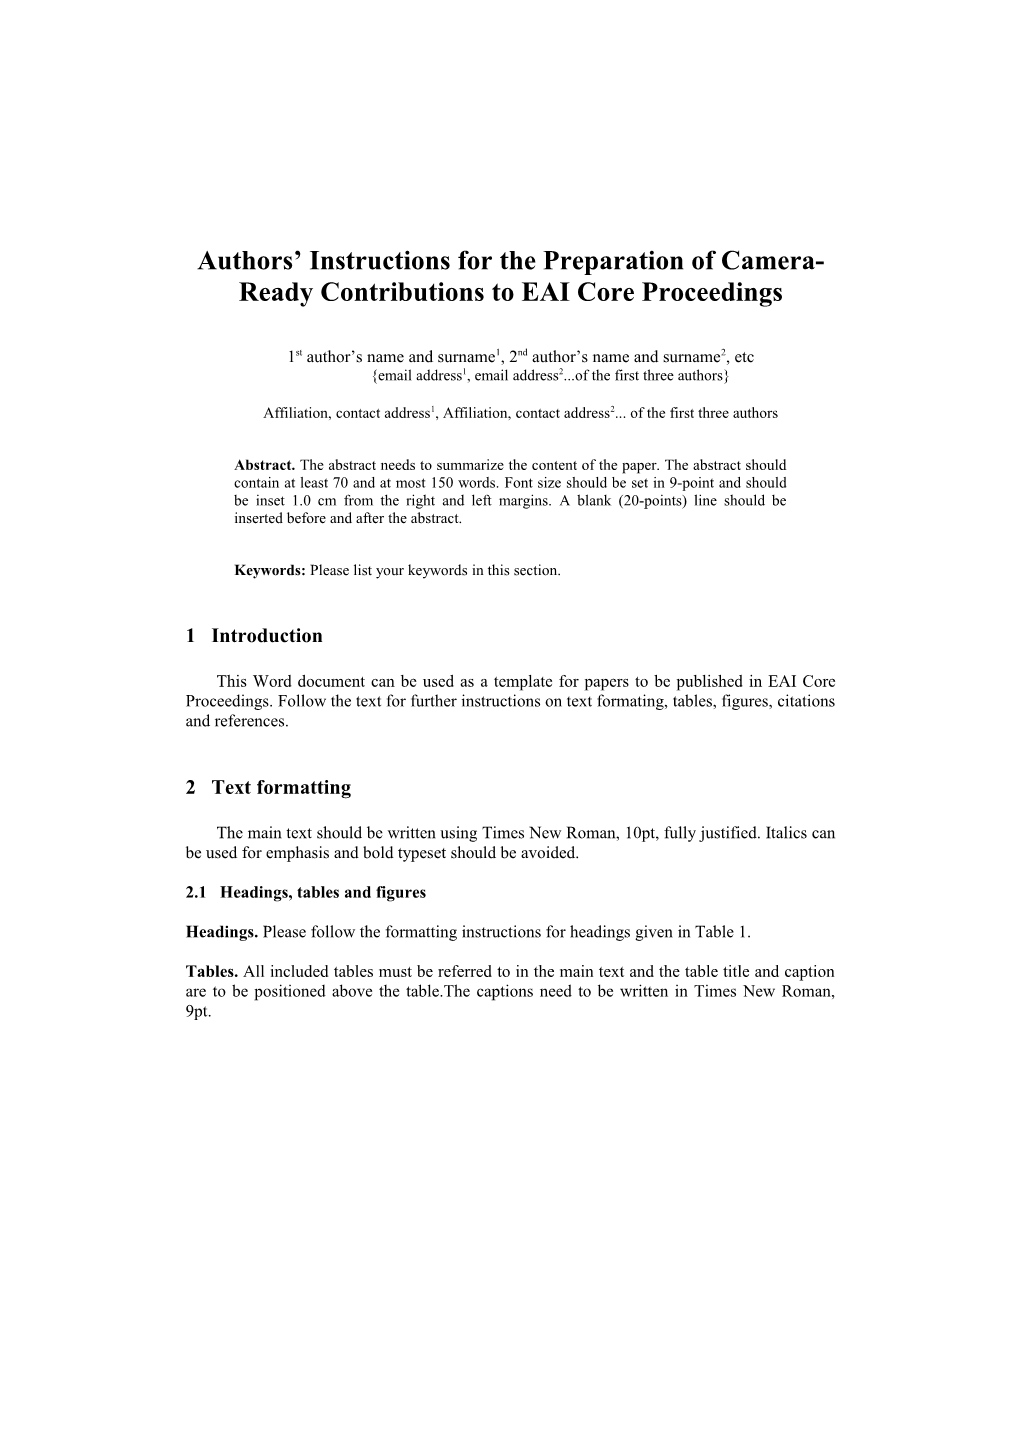 Authors Instructions for the Preparation of Camera-Ready Contributions to EAI Core Proceedings